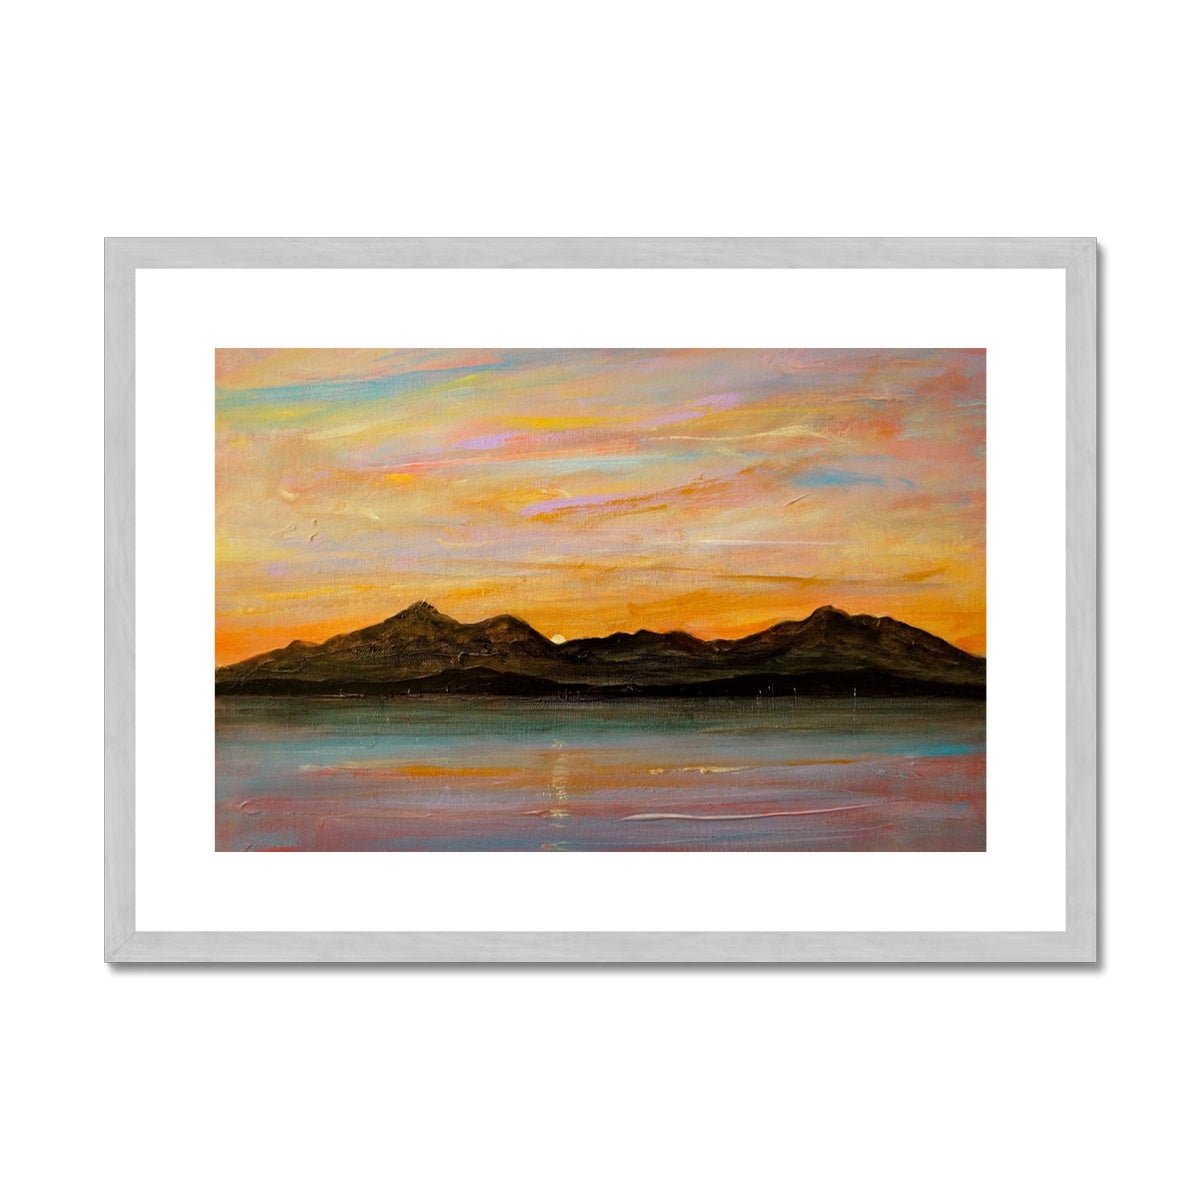 The Sleeping Warrior Arran Painting | Antique Framed & Mounted Prints From Scotland-Antique Framed & Mounted Prints-Arran Art Gallery-A2 Landscape-Silver Frame-Paintings, Prints, Homeware, Art Gifts From Scotland By Scottish Artist Kevin Hunter